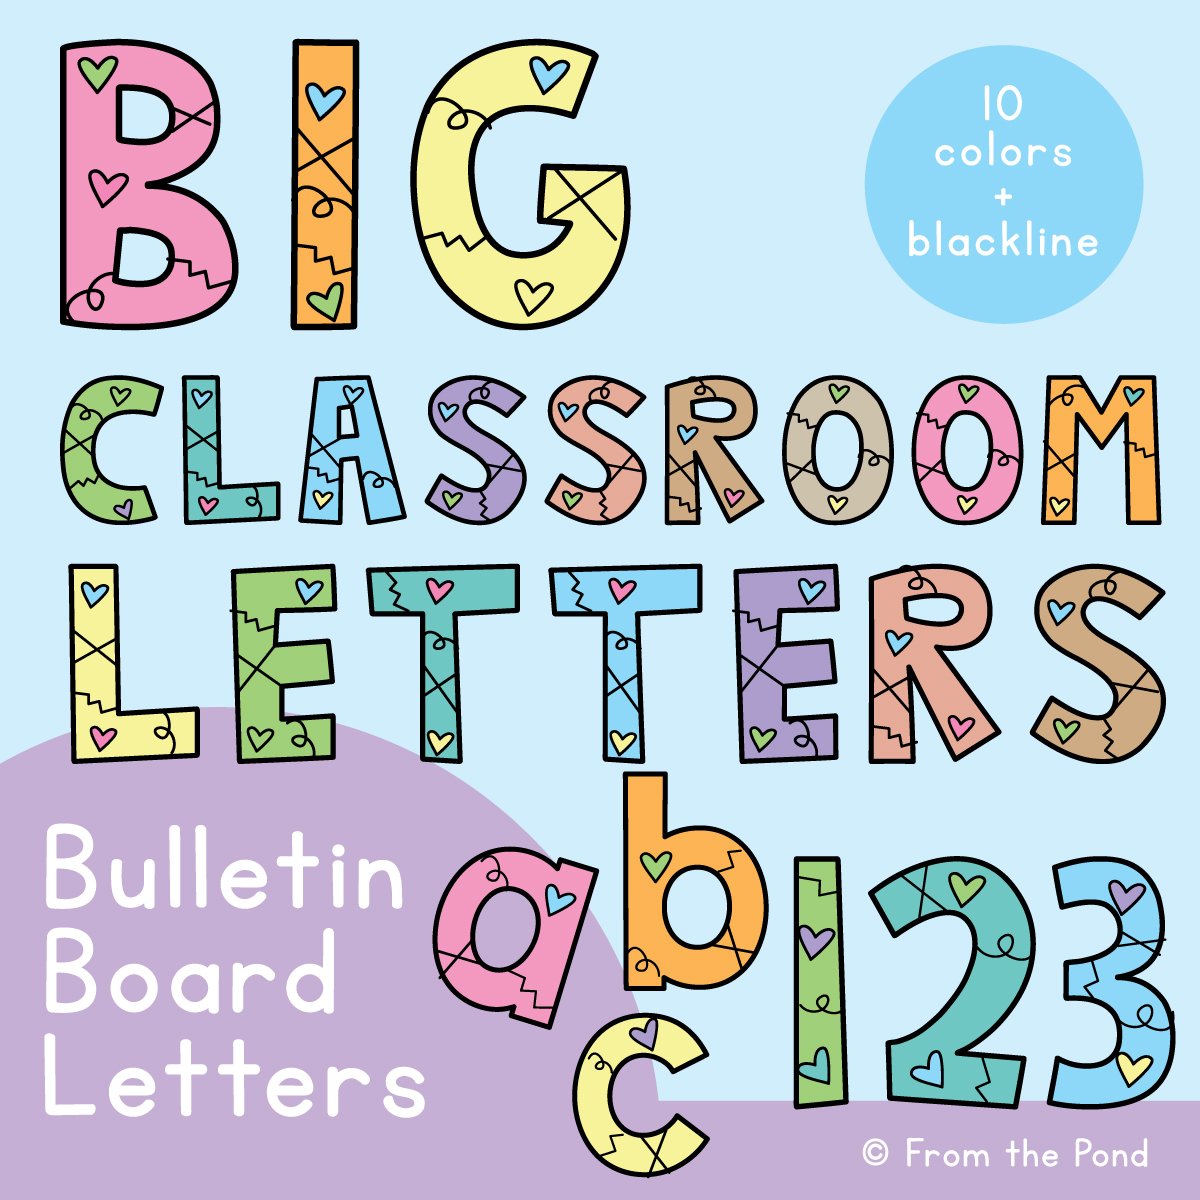 Bulletin Board Letters For The Classroom Just Print And Display 